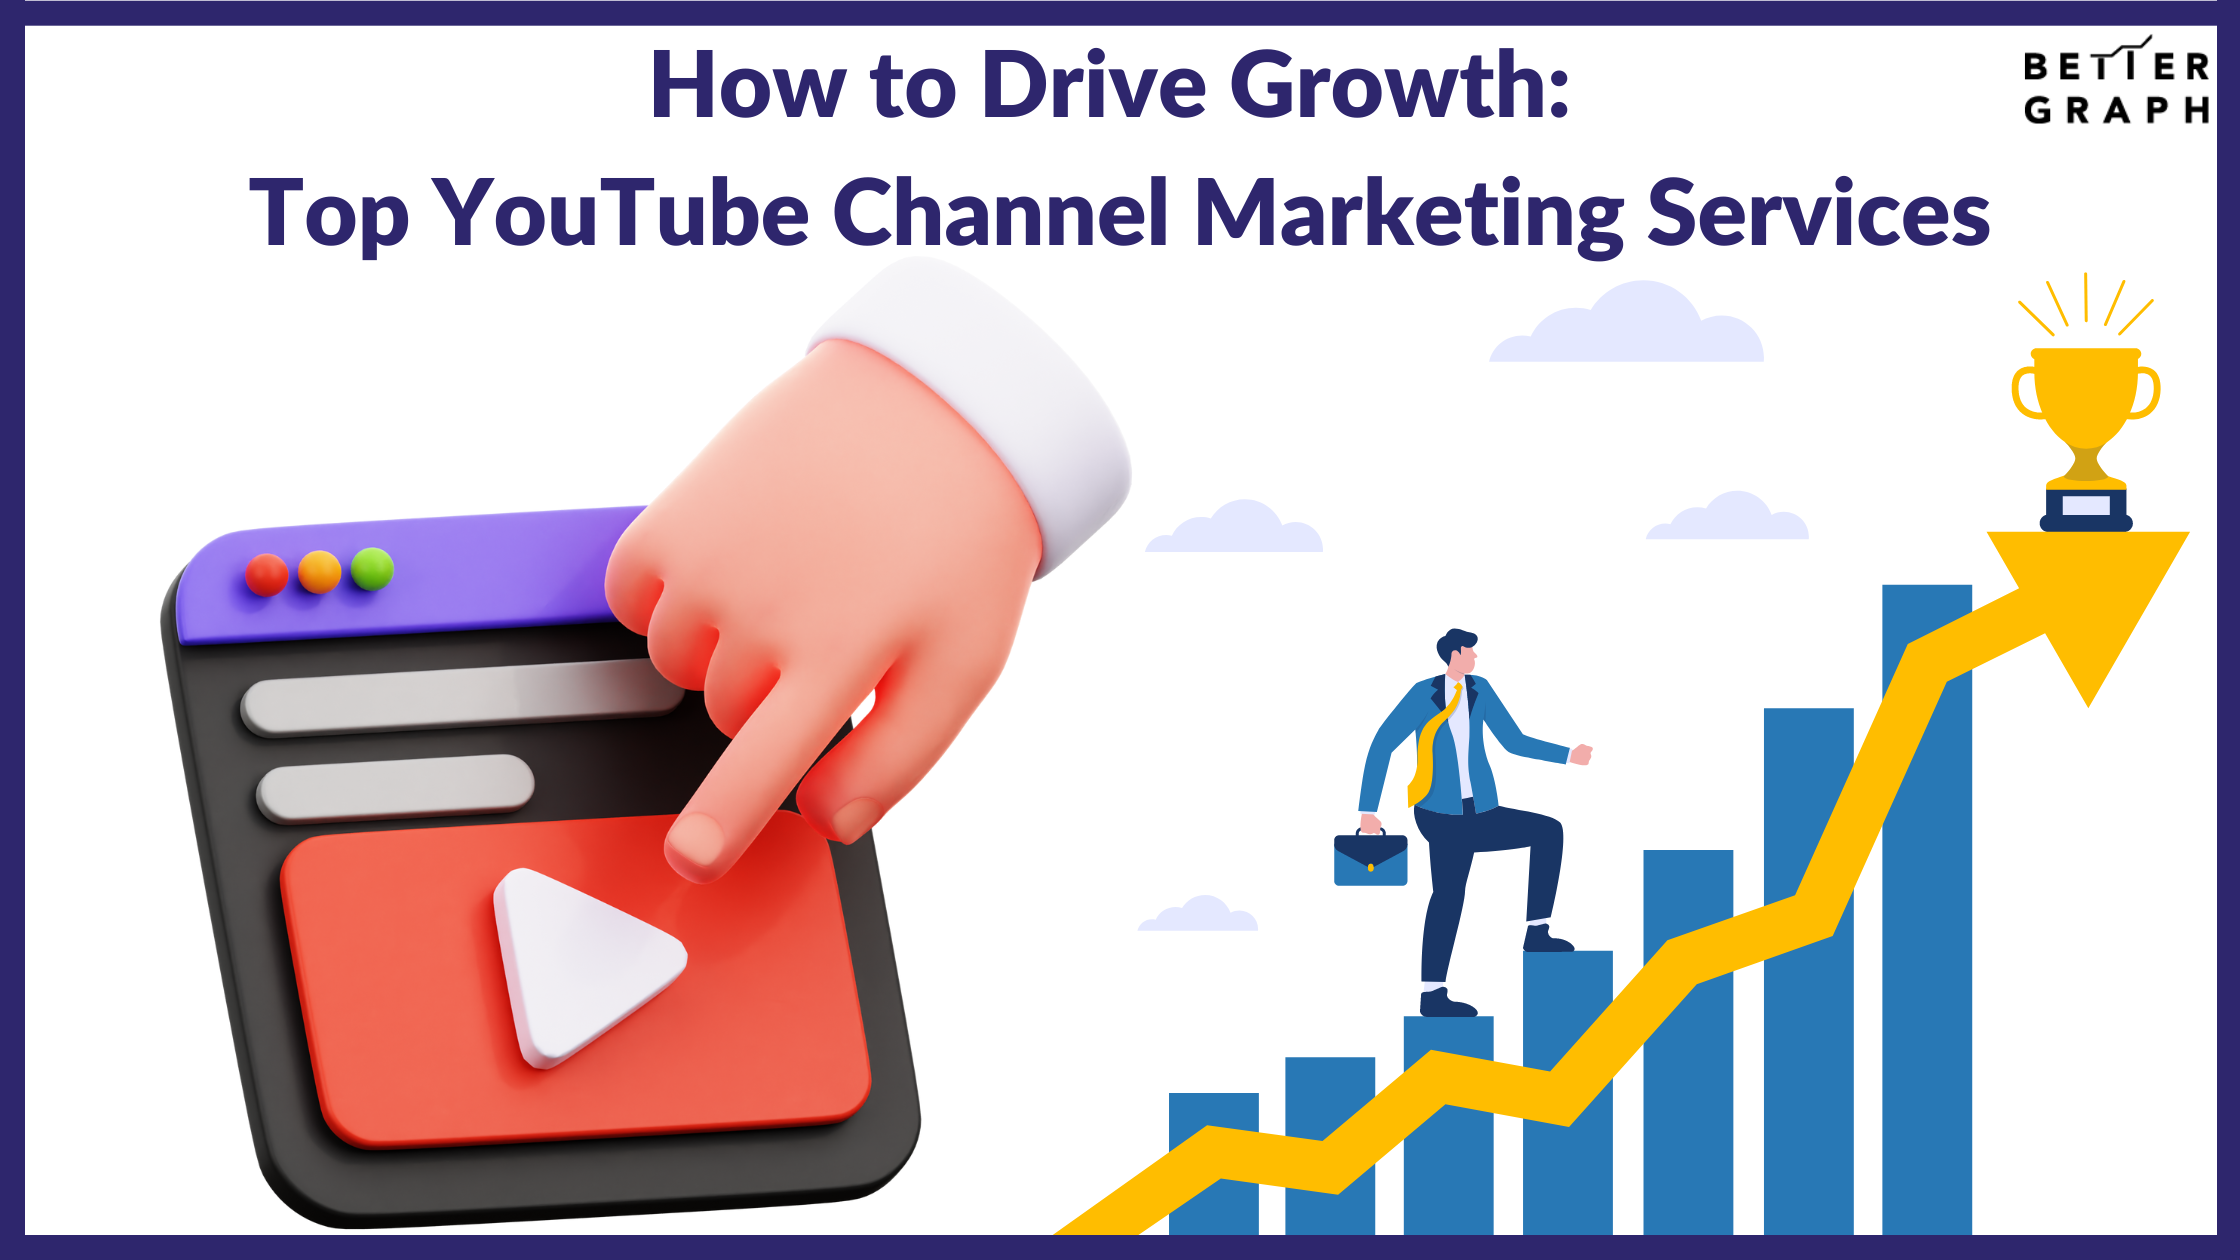 How to Drive Growth  Top YouTube Channel Marketing Services (2).png  by BetterGraph